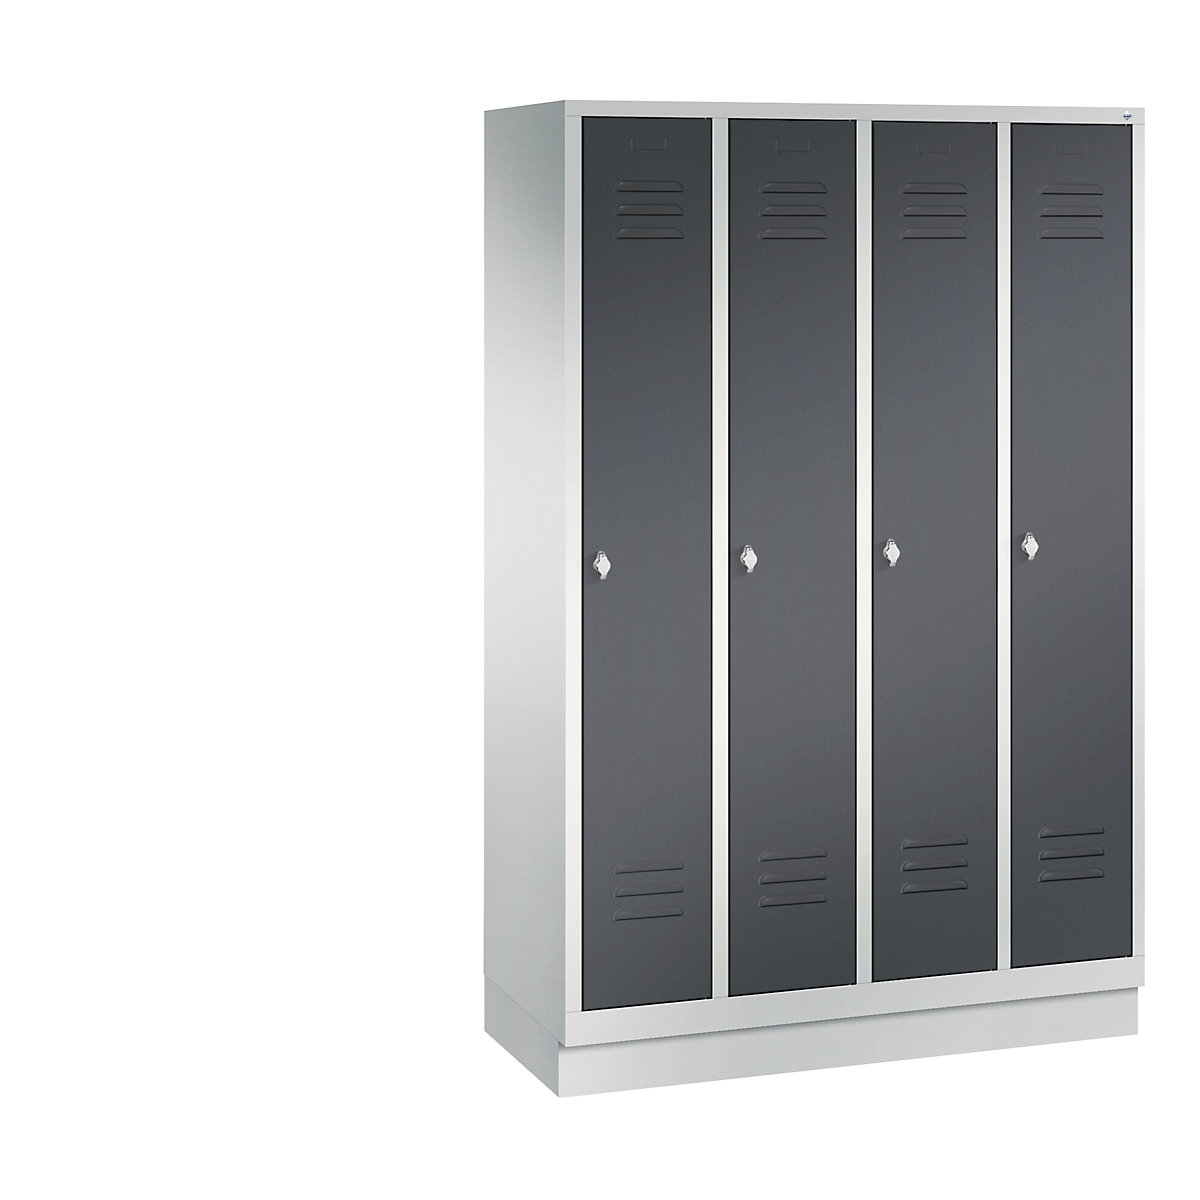 CLASSIC cloakroom locker with plinth – C+P, 4 compartments, compartment width 300 mm, light grey / black grey-5